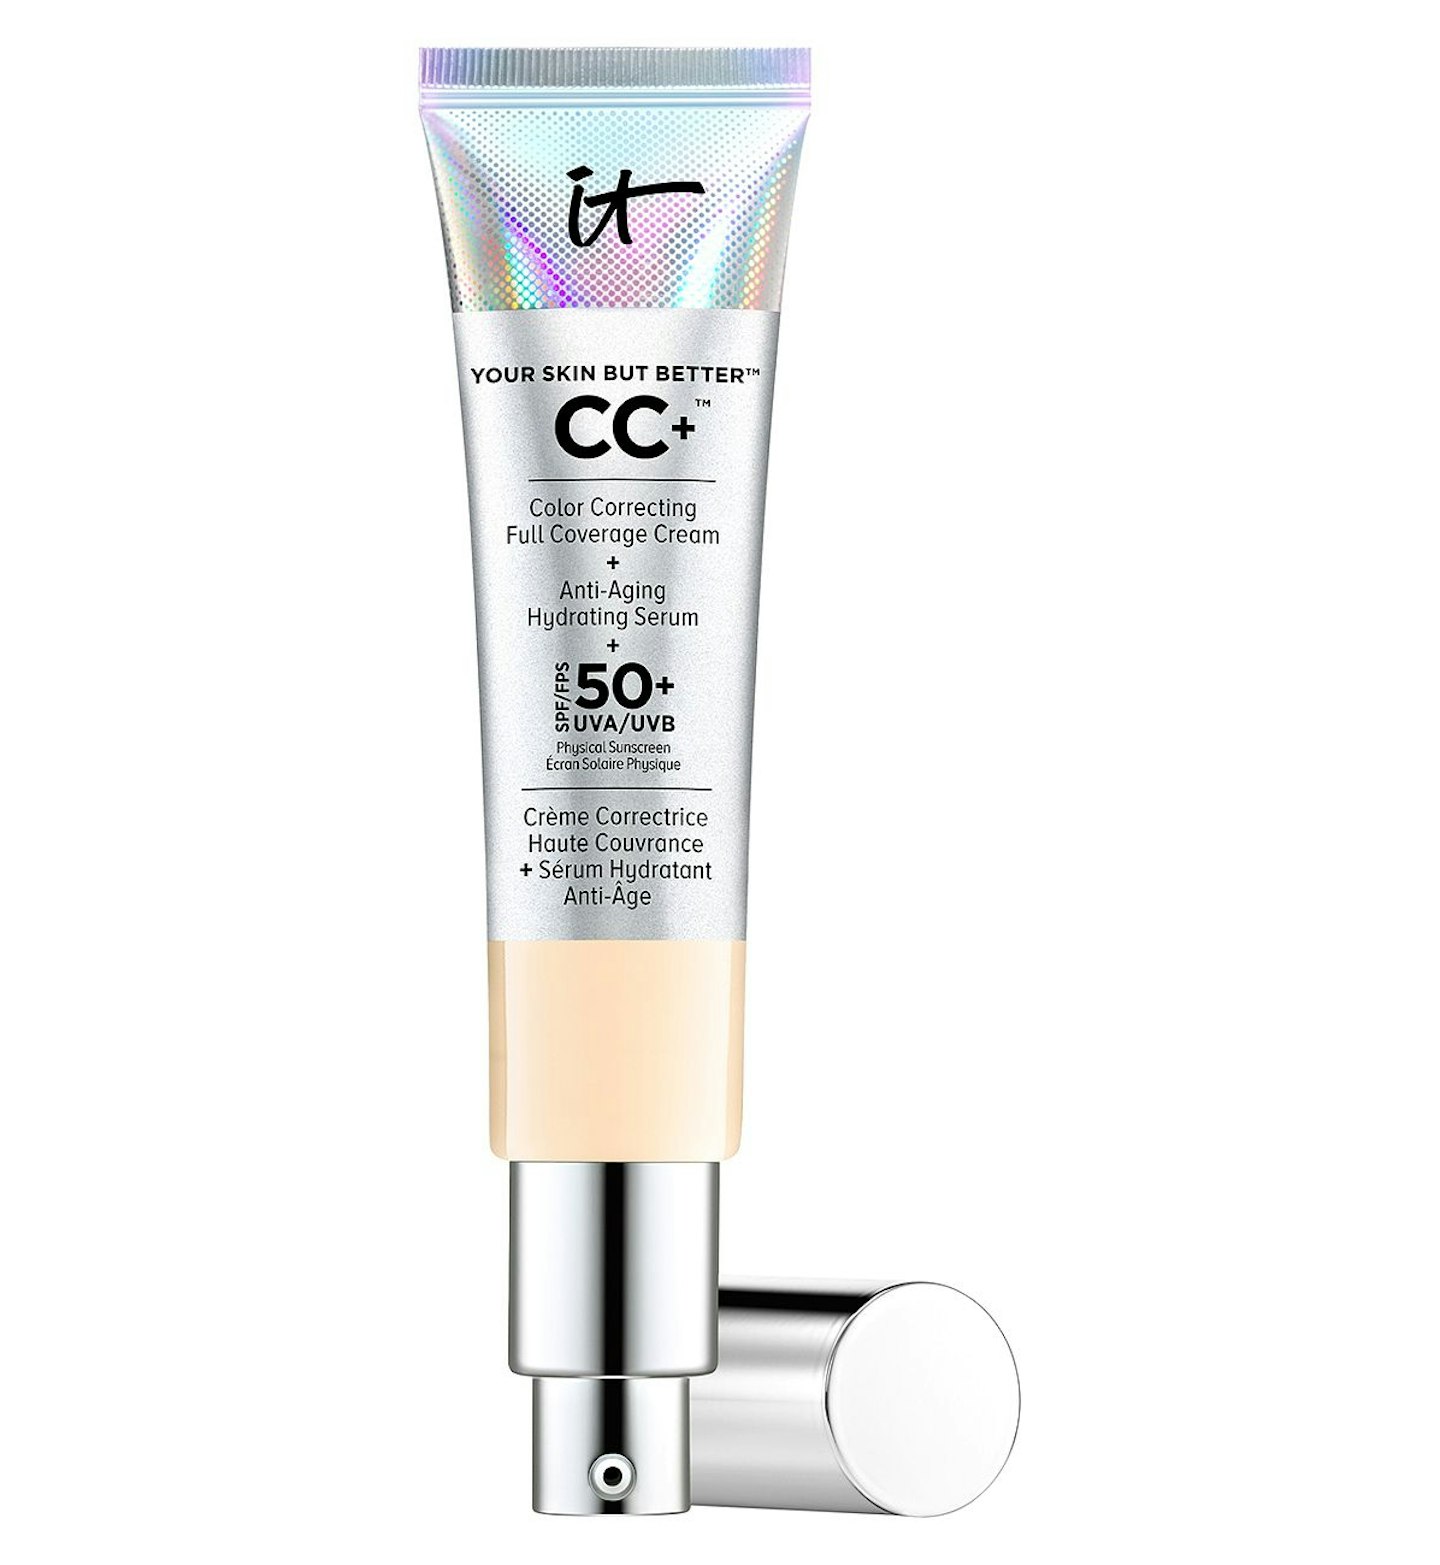 IT Cosmetics Your Skin But Betteru2122 CC+ Creamu2122 SPF 50+, £31 from Boots